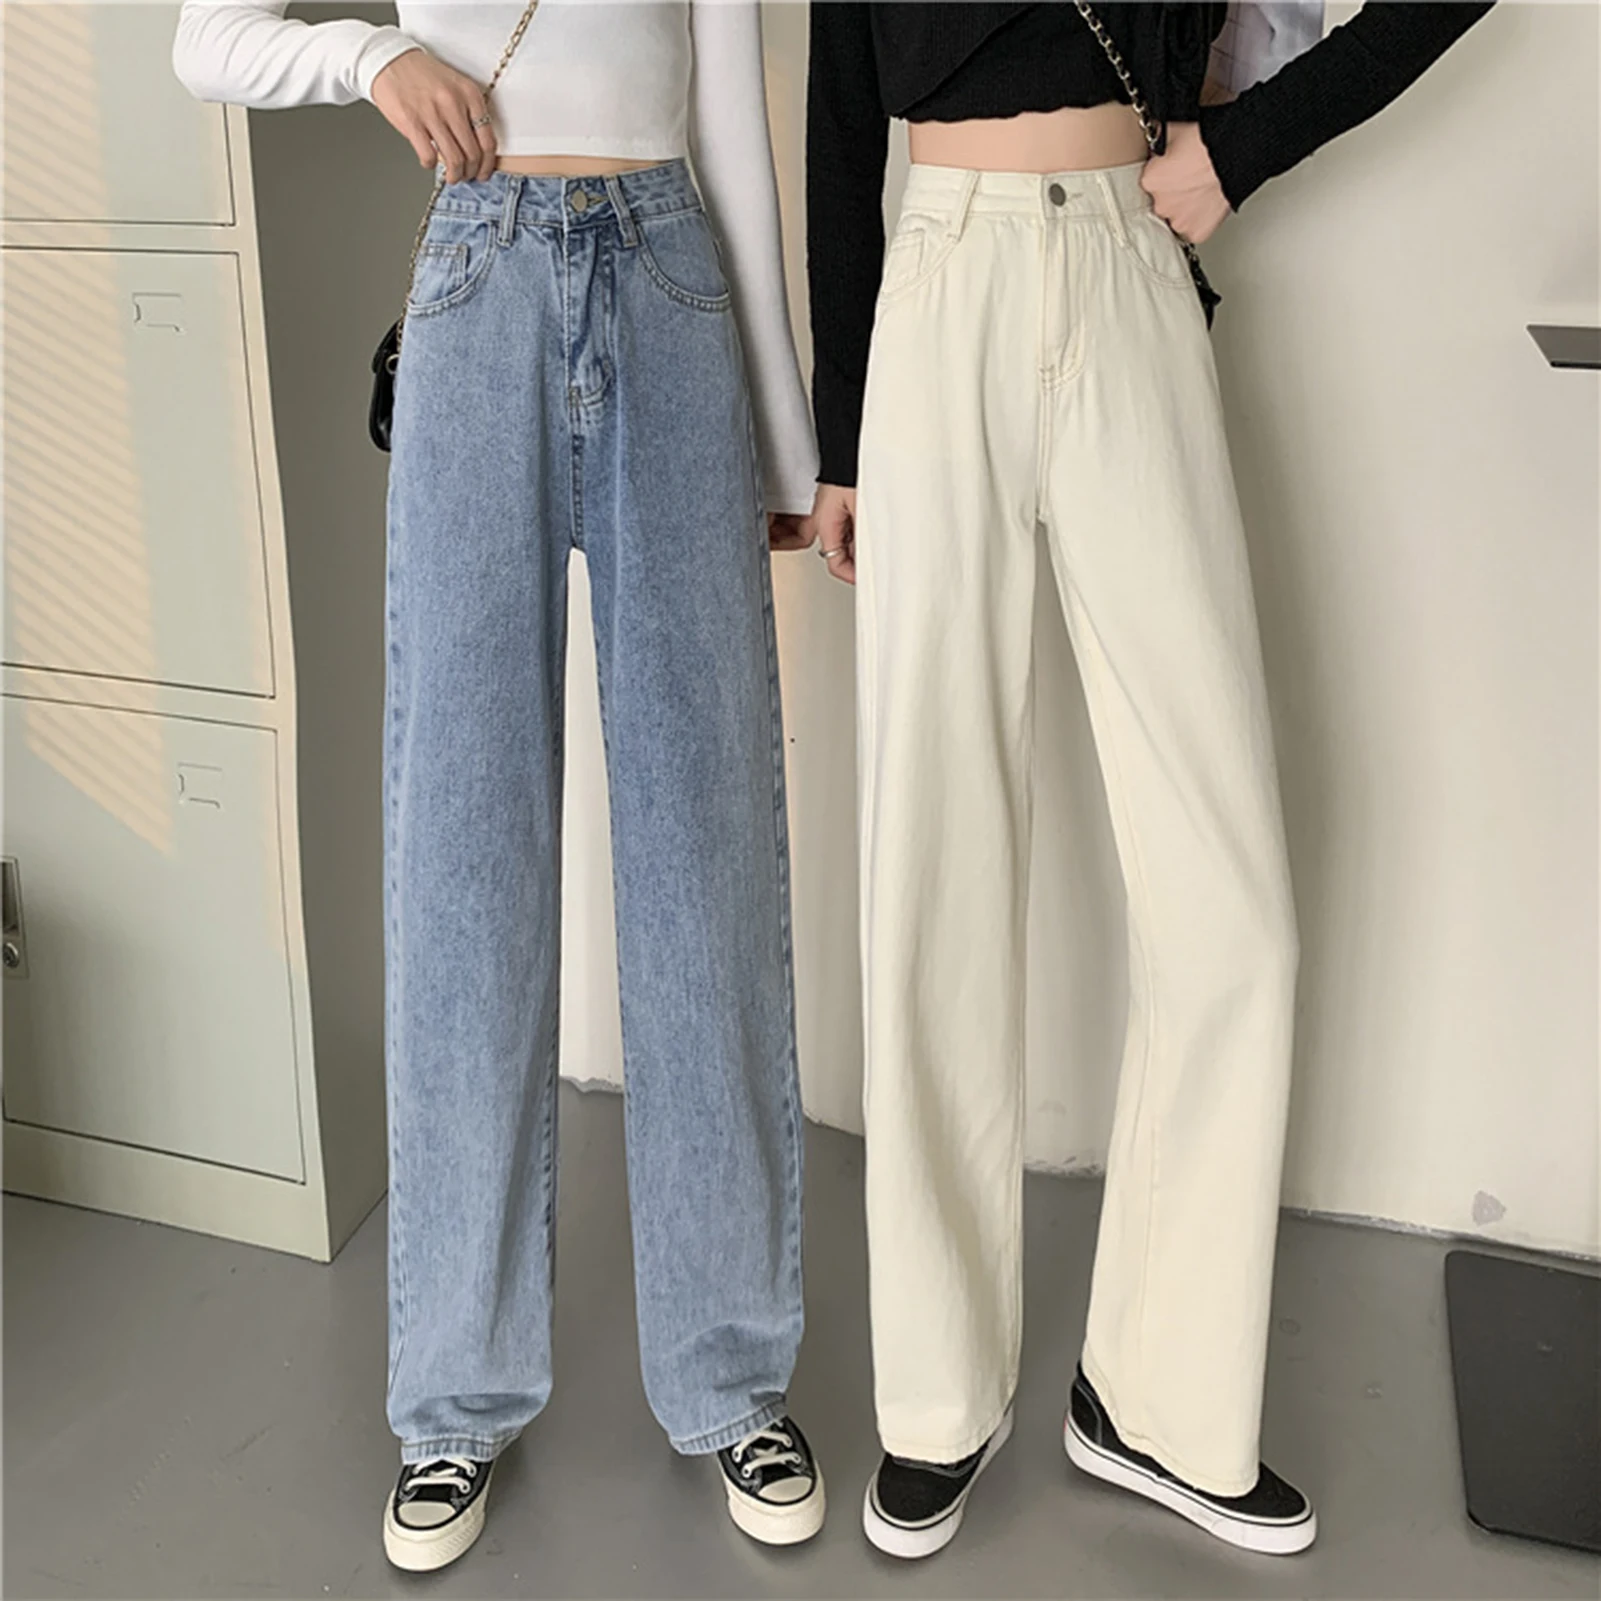 Women's Straight Jeans Curvy Totally Shaping Streetwear Pants for School Office Party Outerwear PR Sale